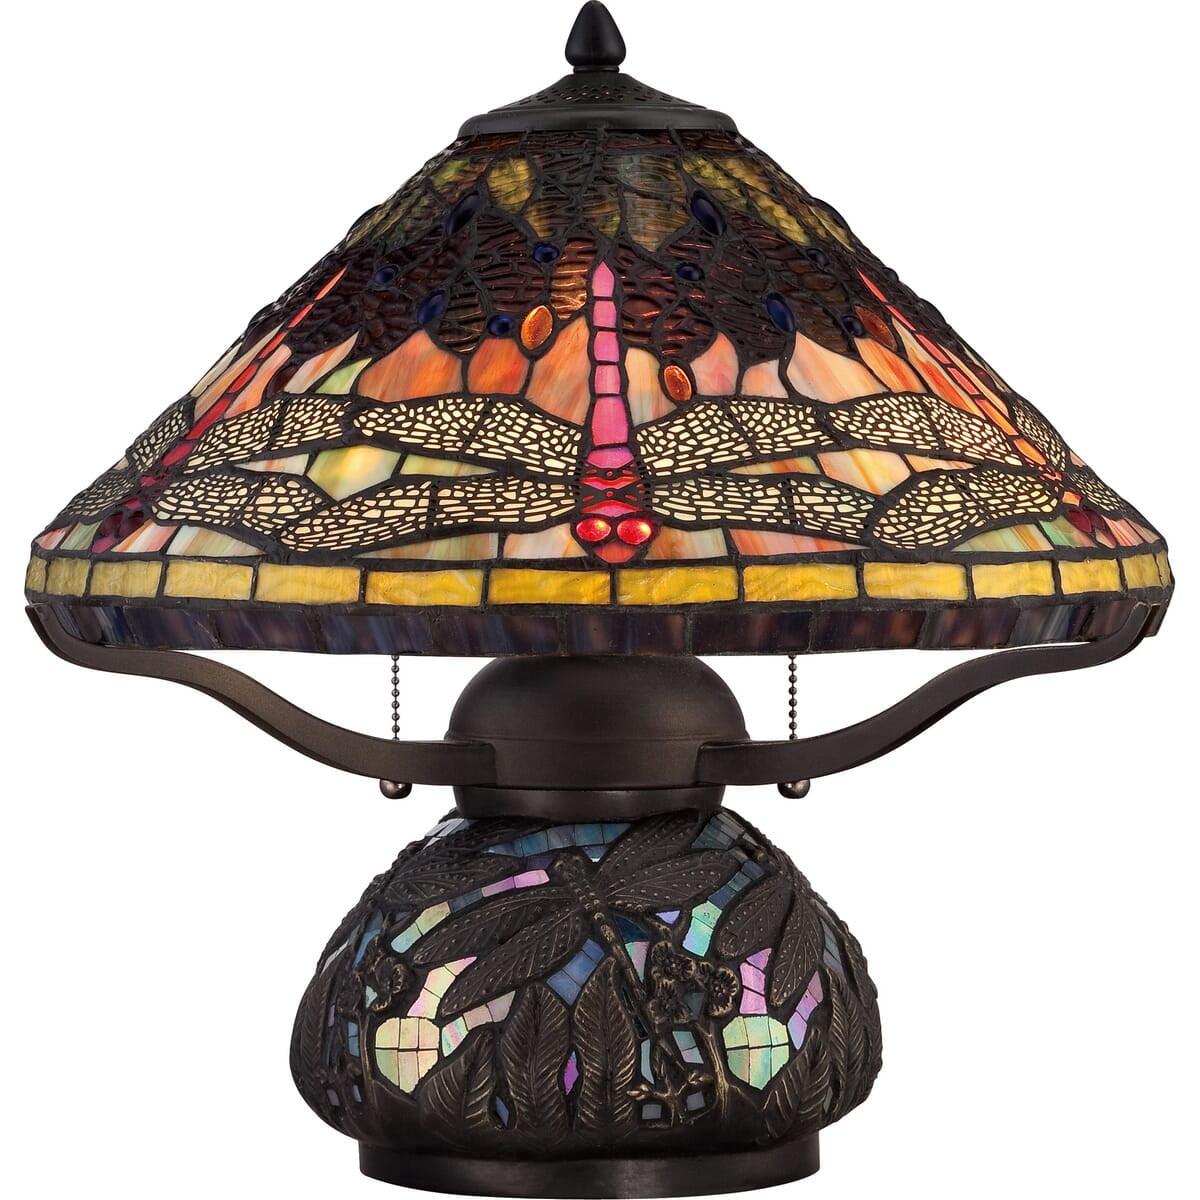 Elegant Tiffany Dragonfly 17" Bronze Table Lamp with Glass Mosaic Shade